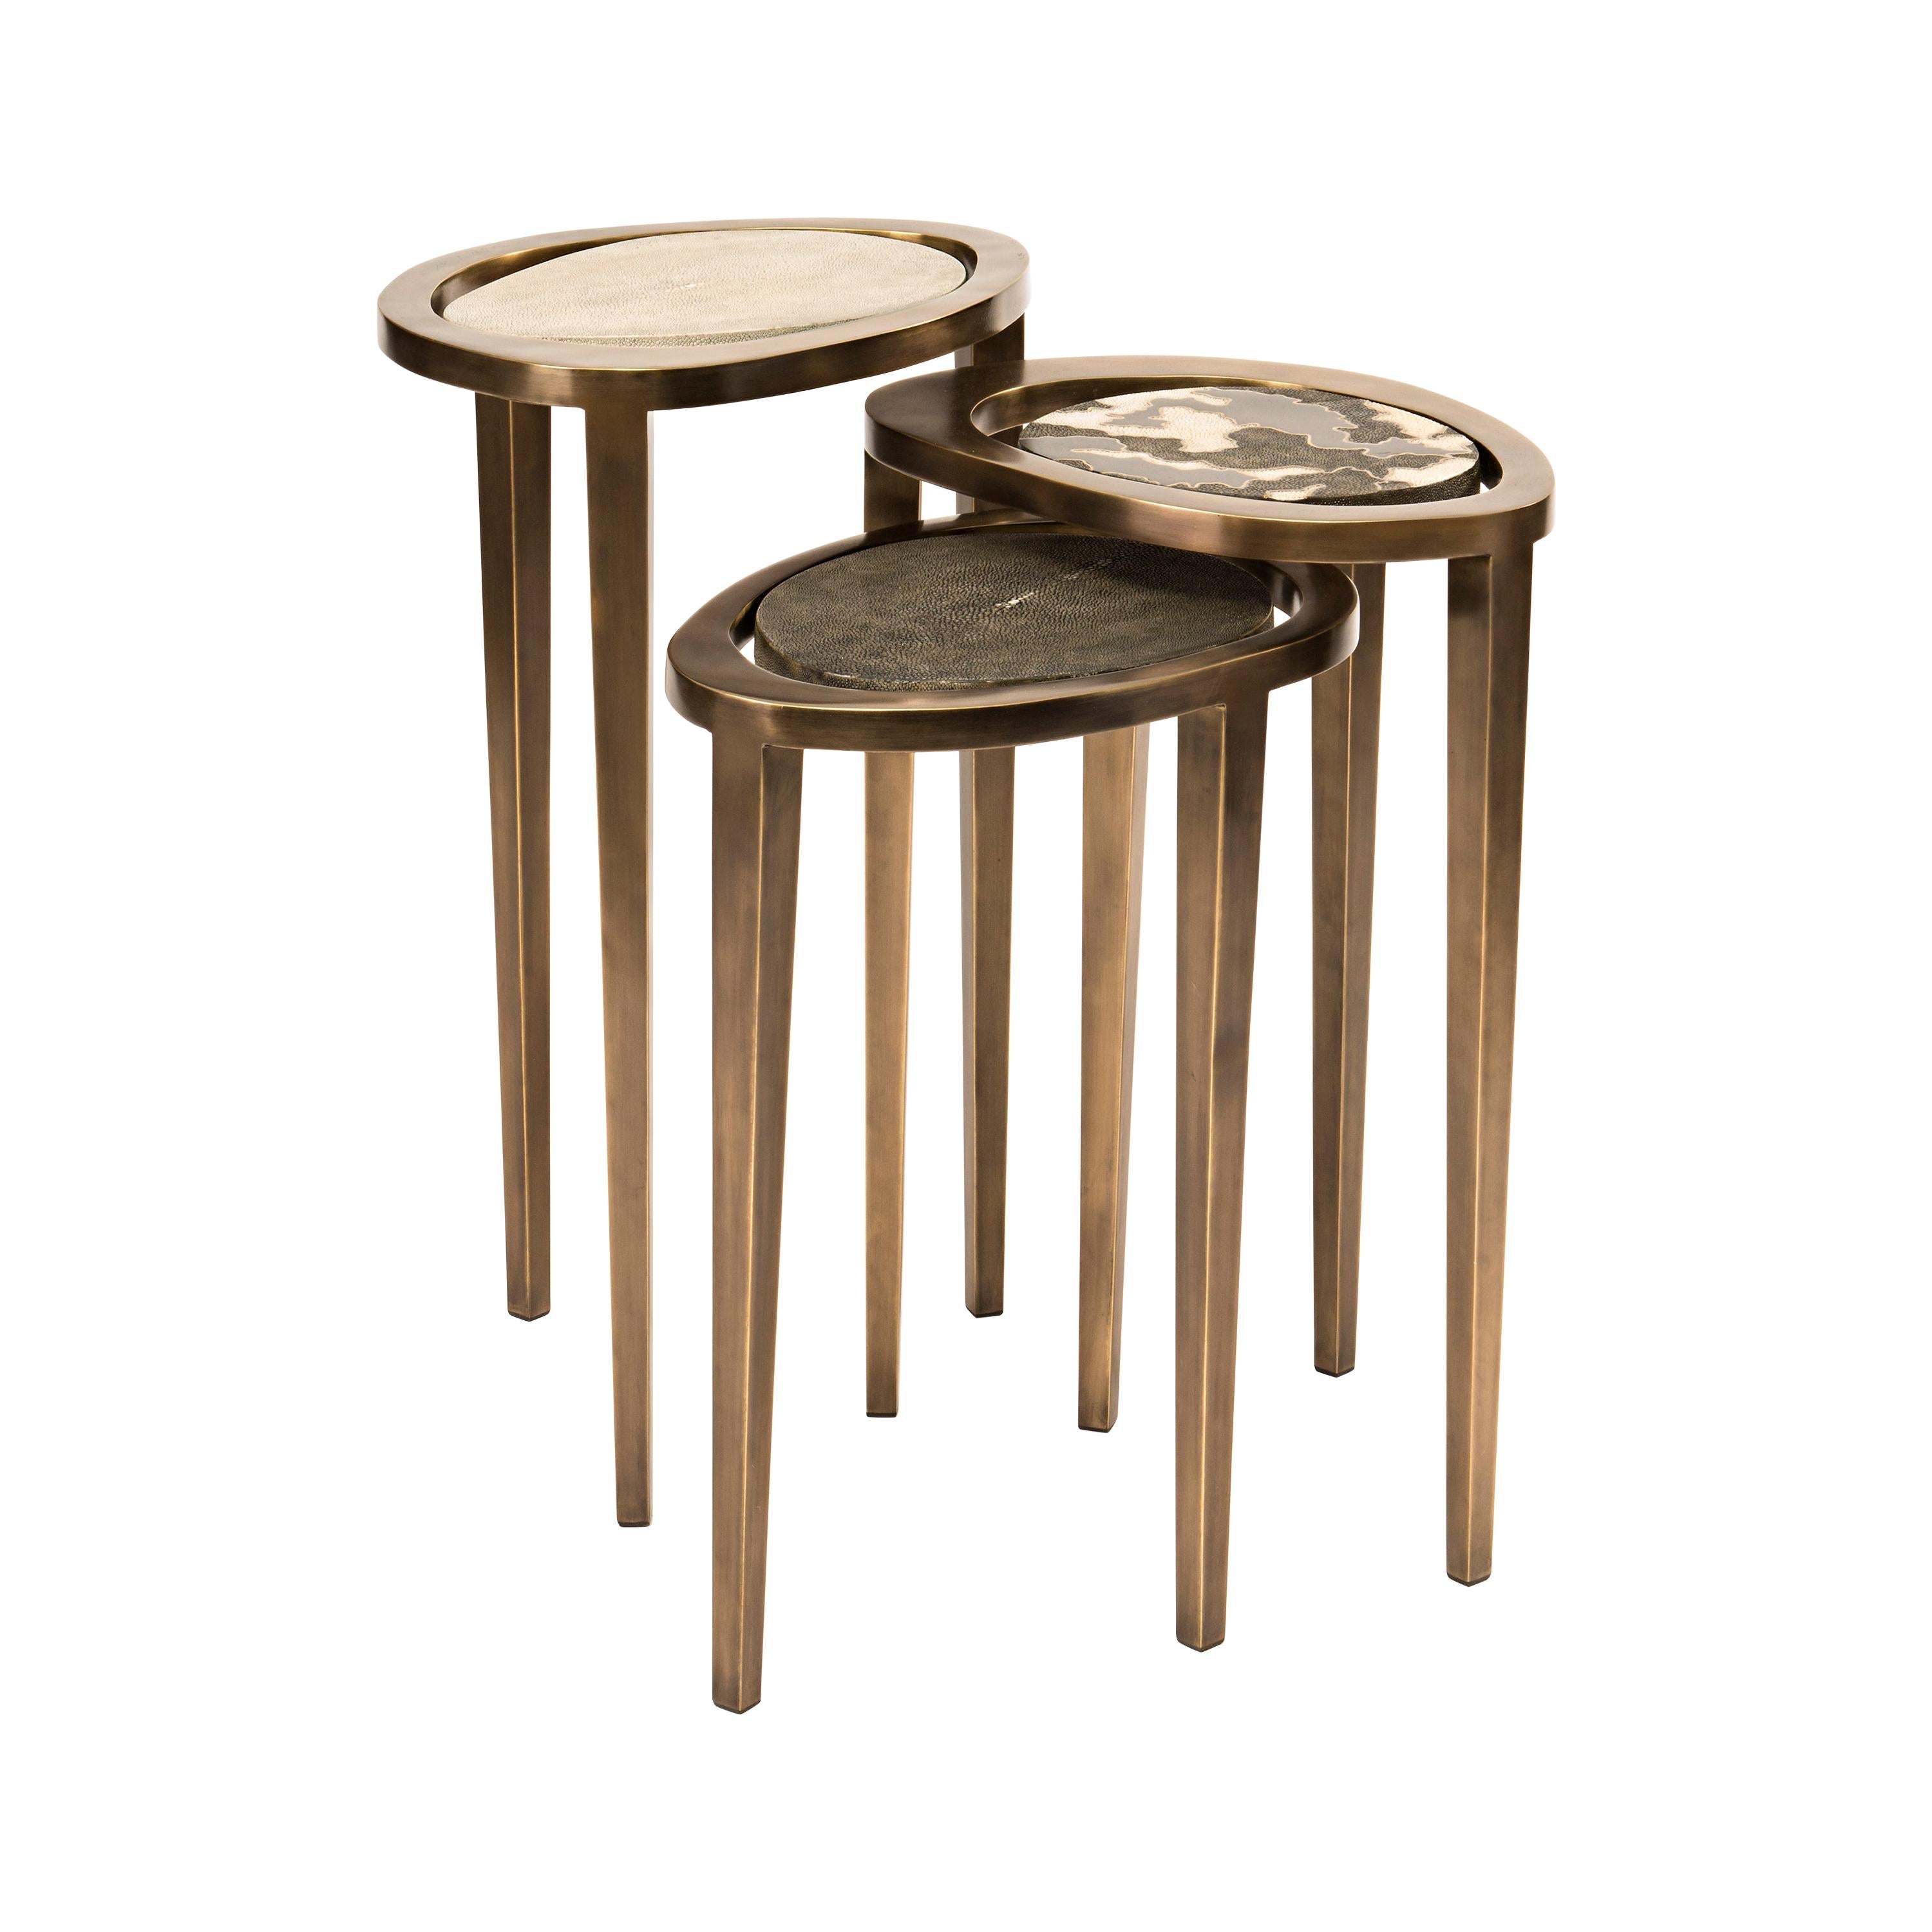 Set of 3 Peacock Nesting Side Tables in, Shagreen, Shell & Brass by R&Y Augousti For Sale